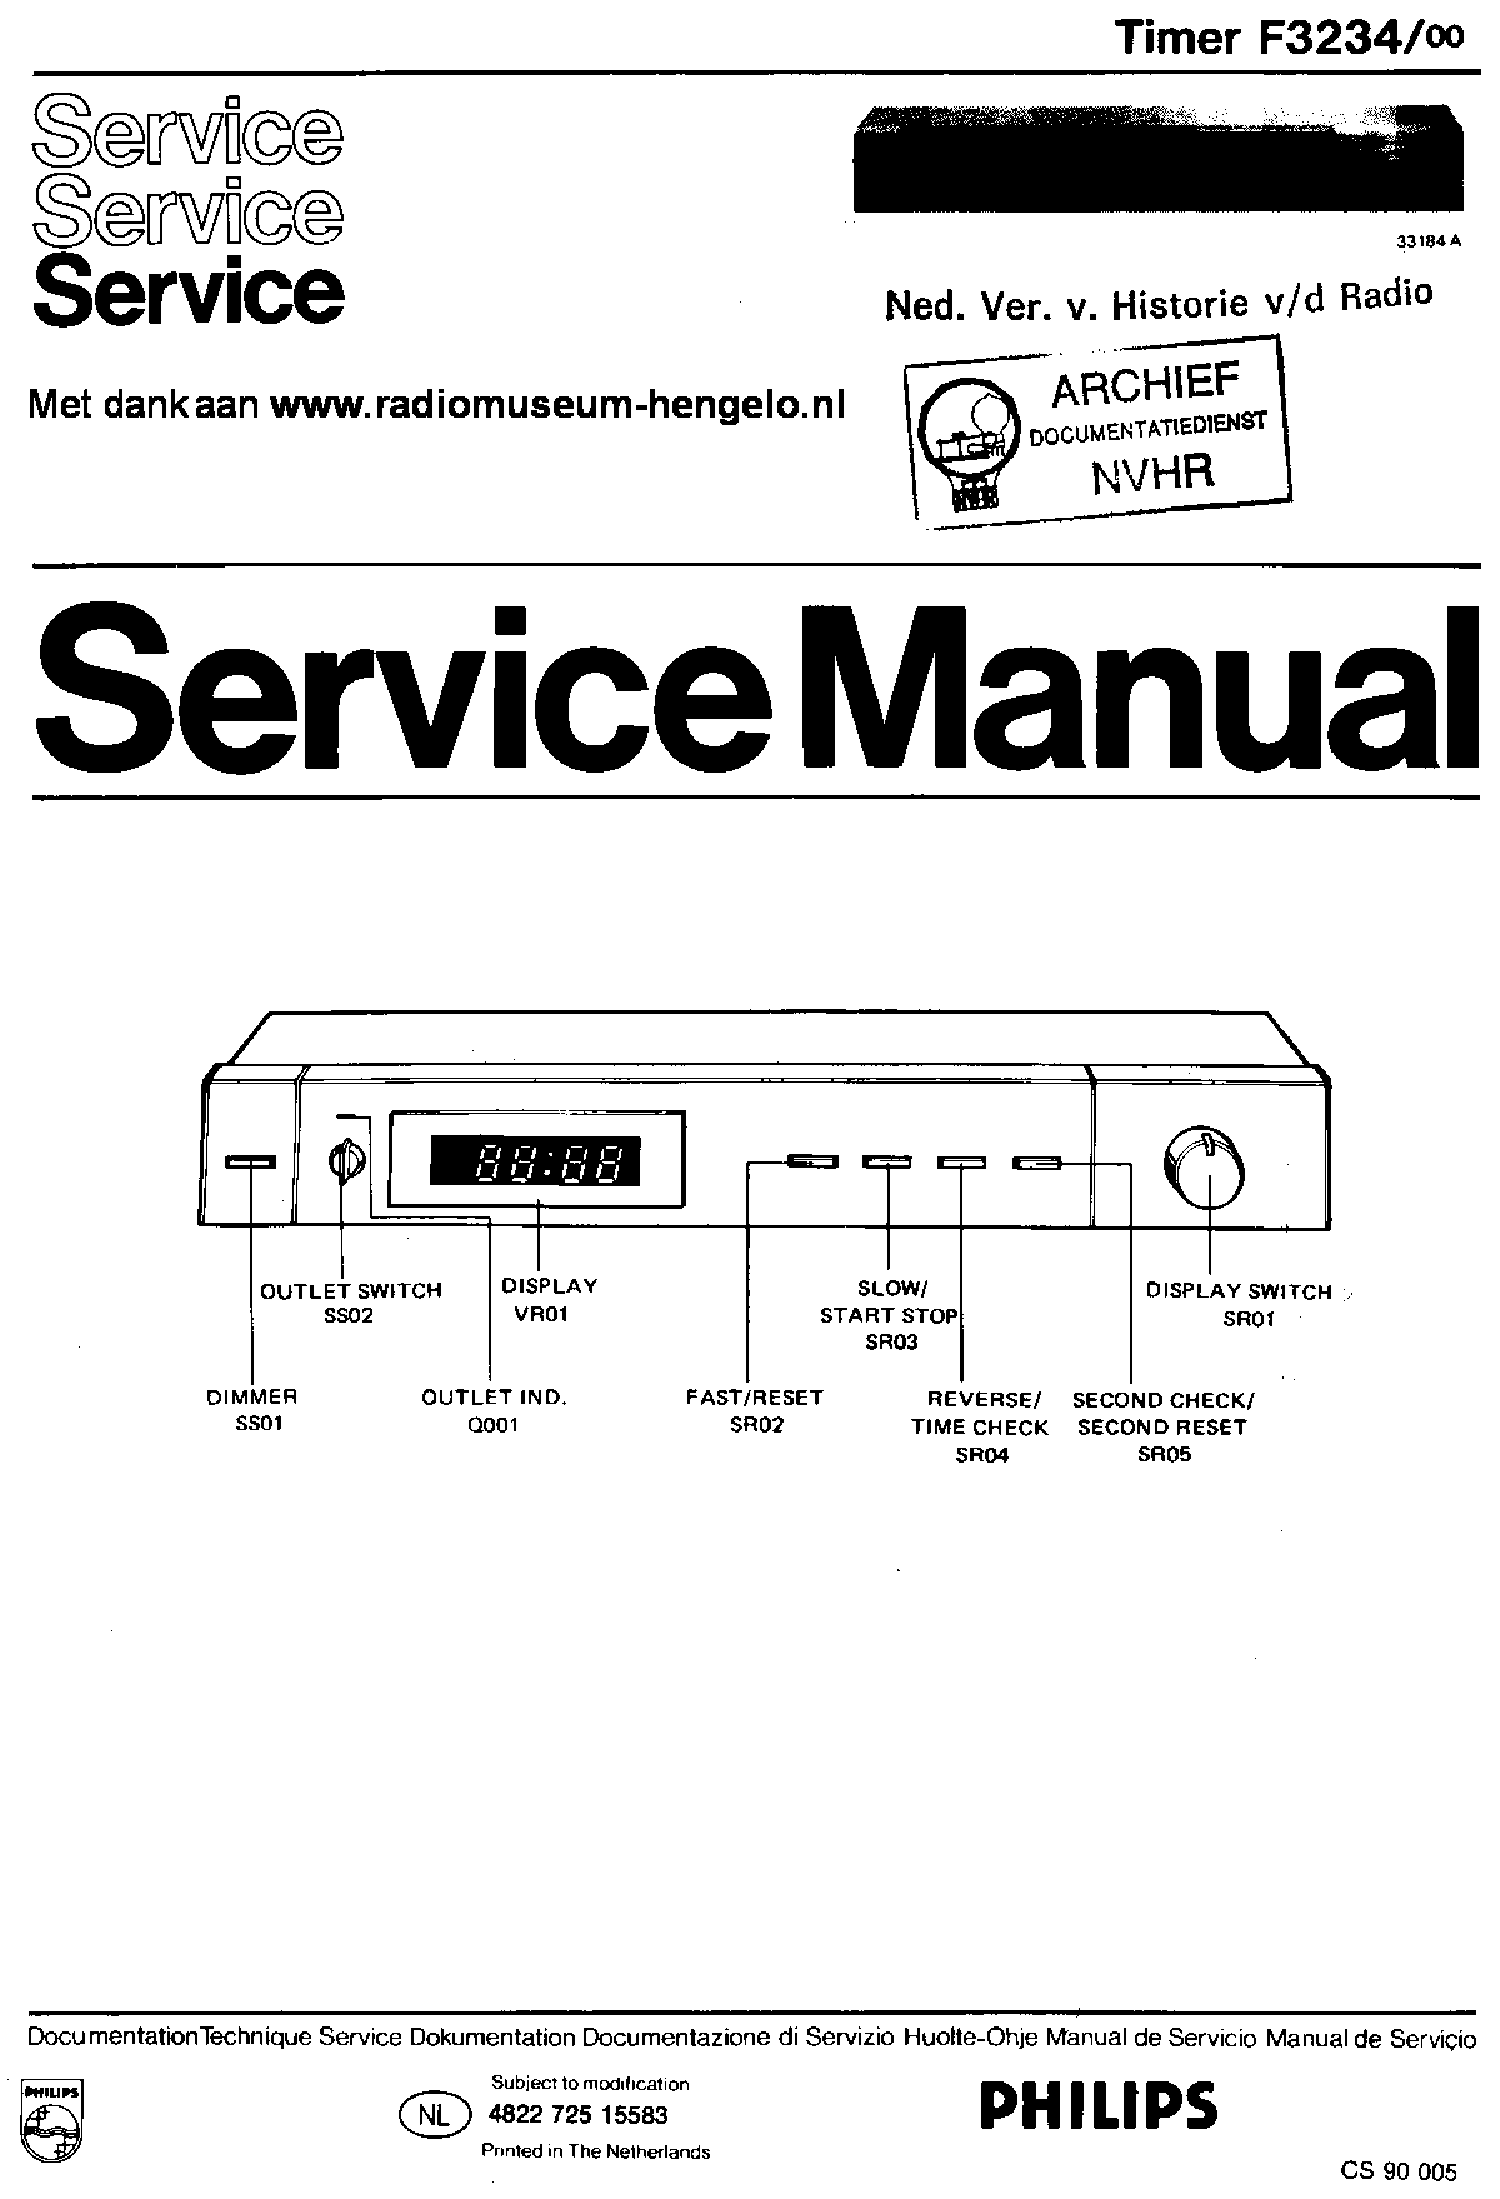 PHILIPS F3234-00 TIMER SM service manual (1st page)